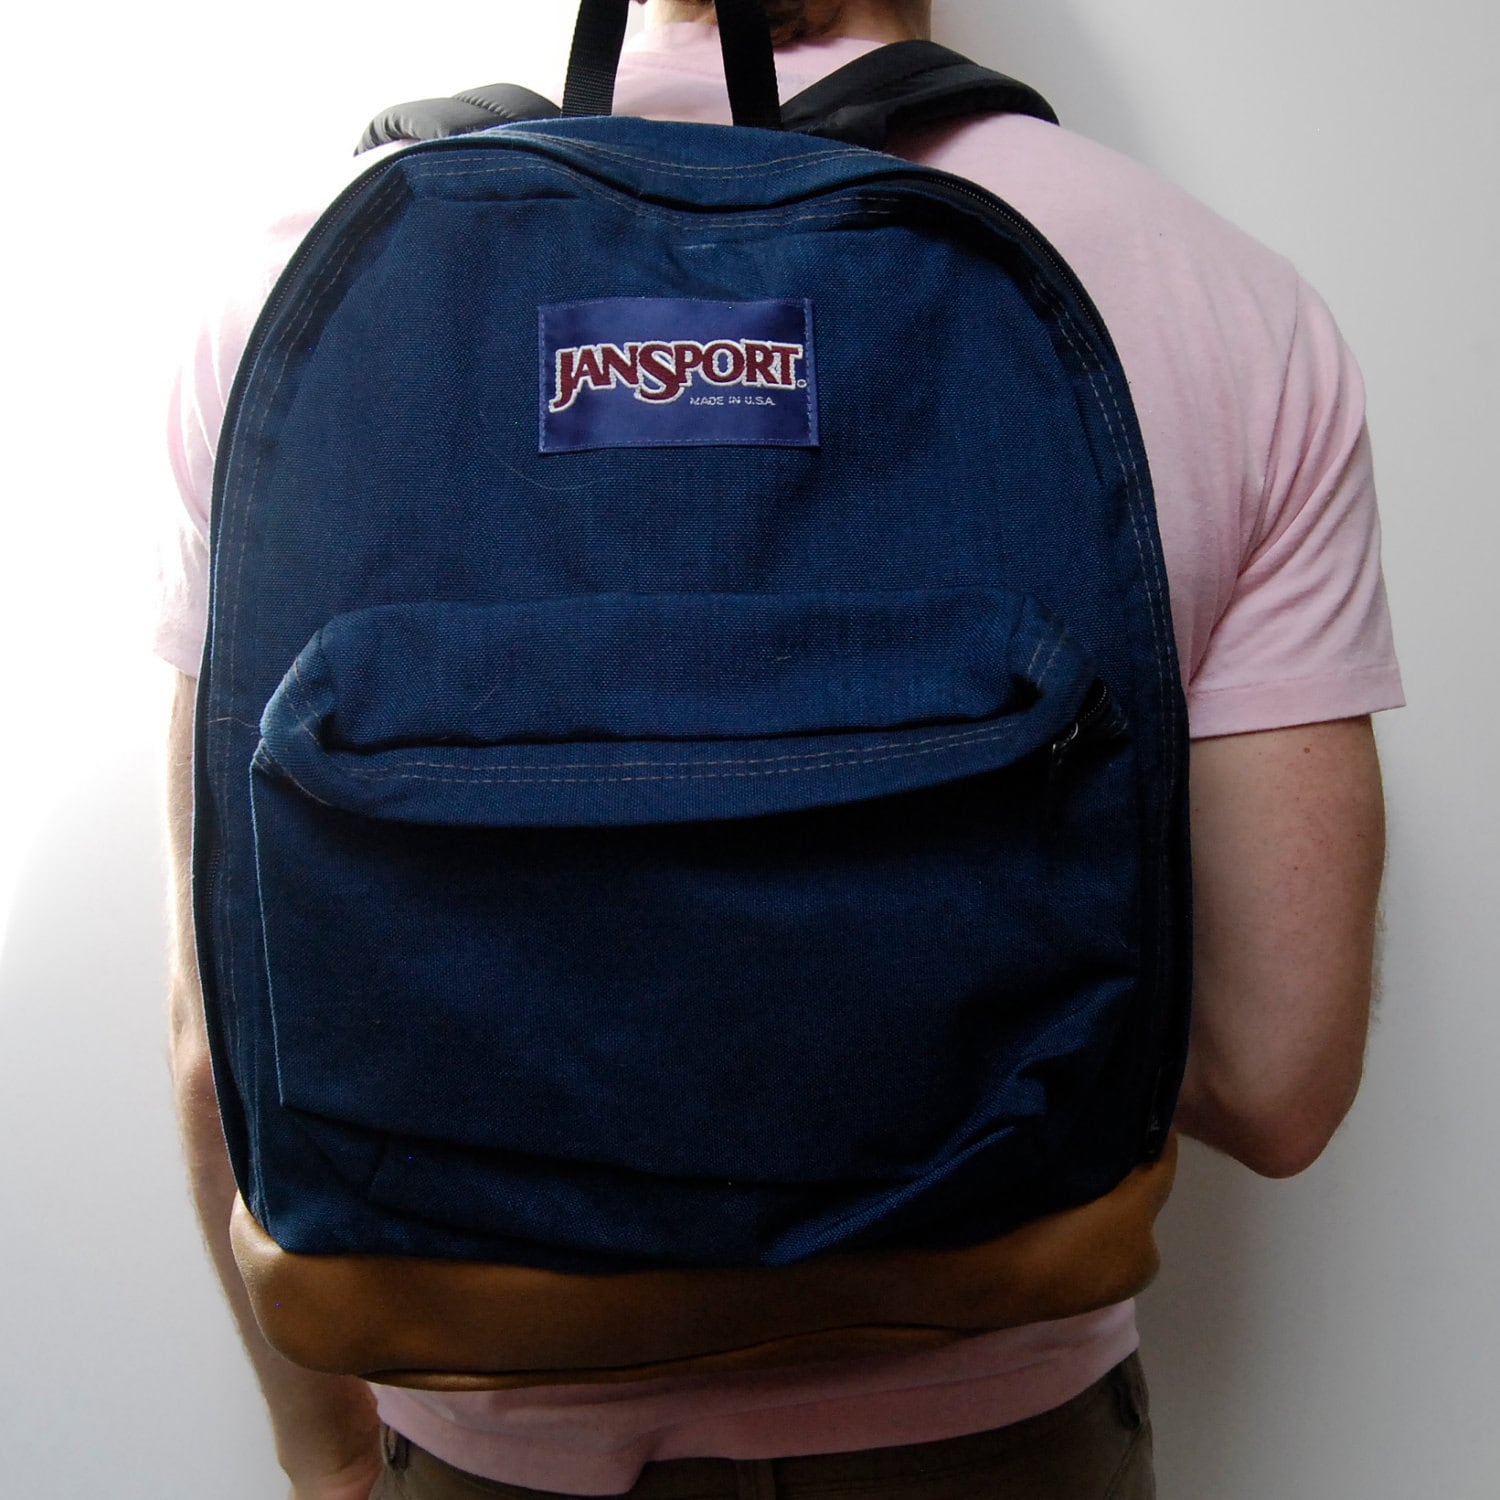 LEATHER canvas unique JANSPORT backpack DEADSTOCK made in usa